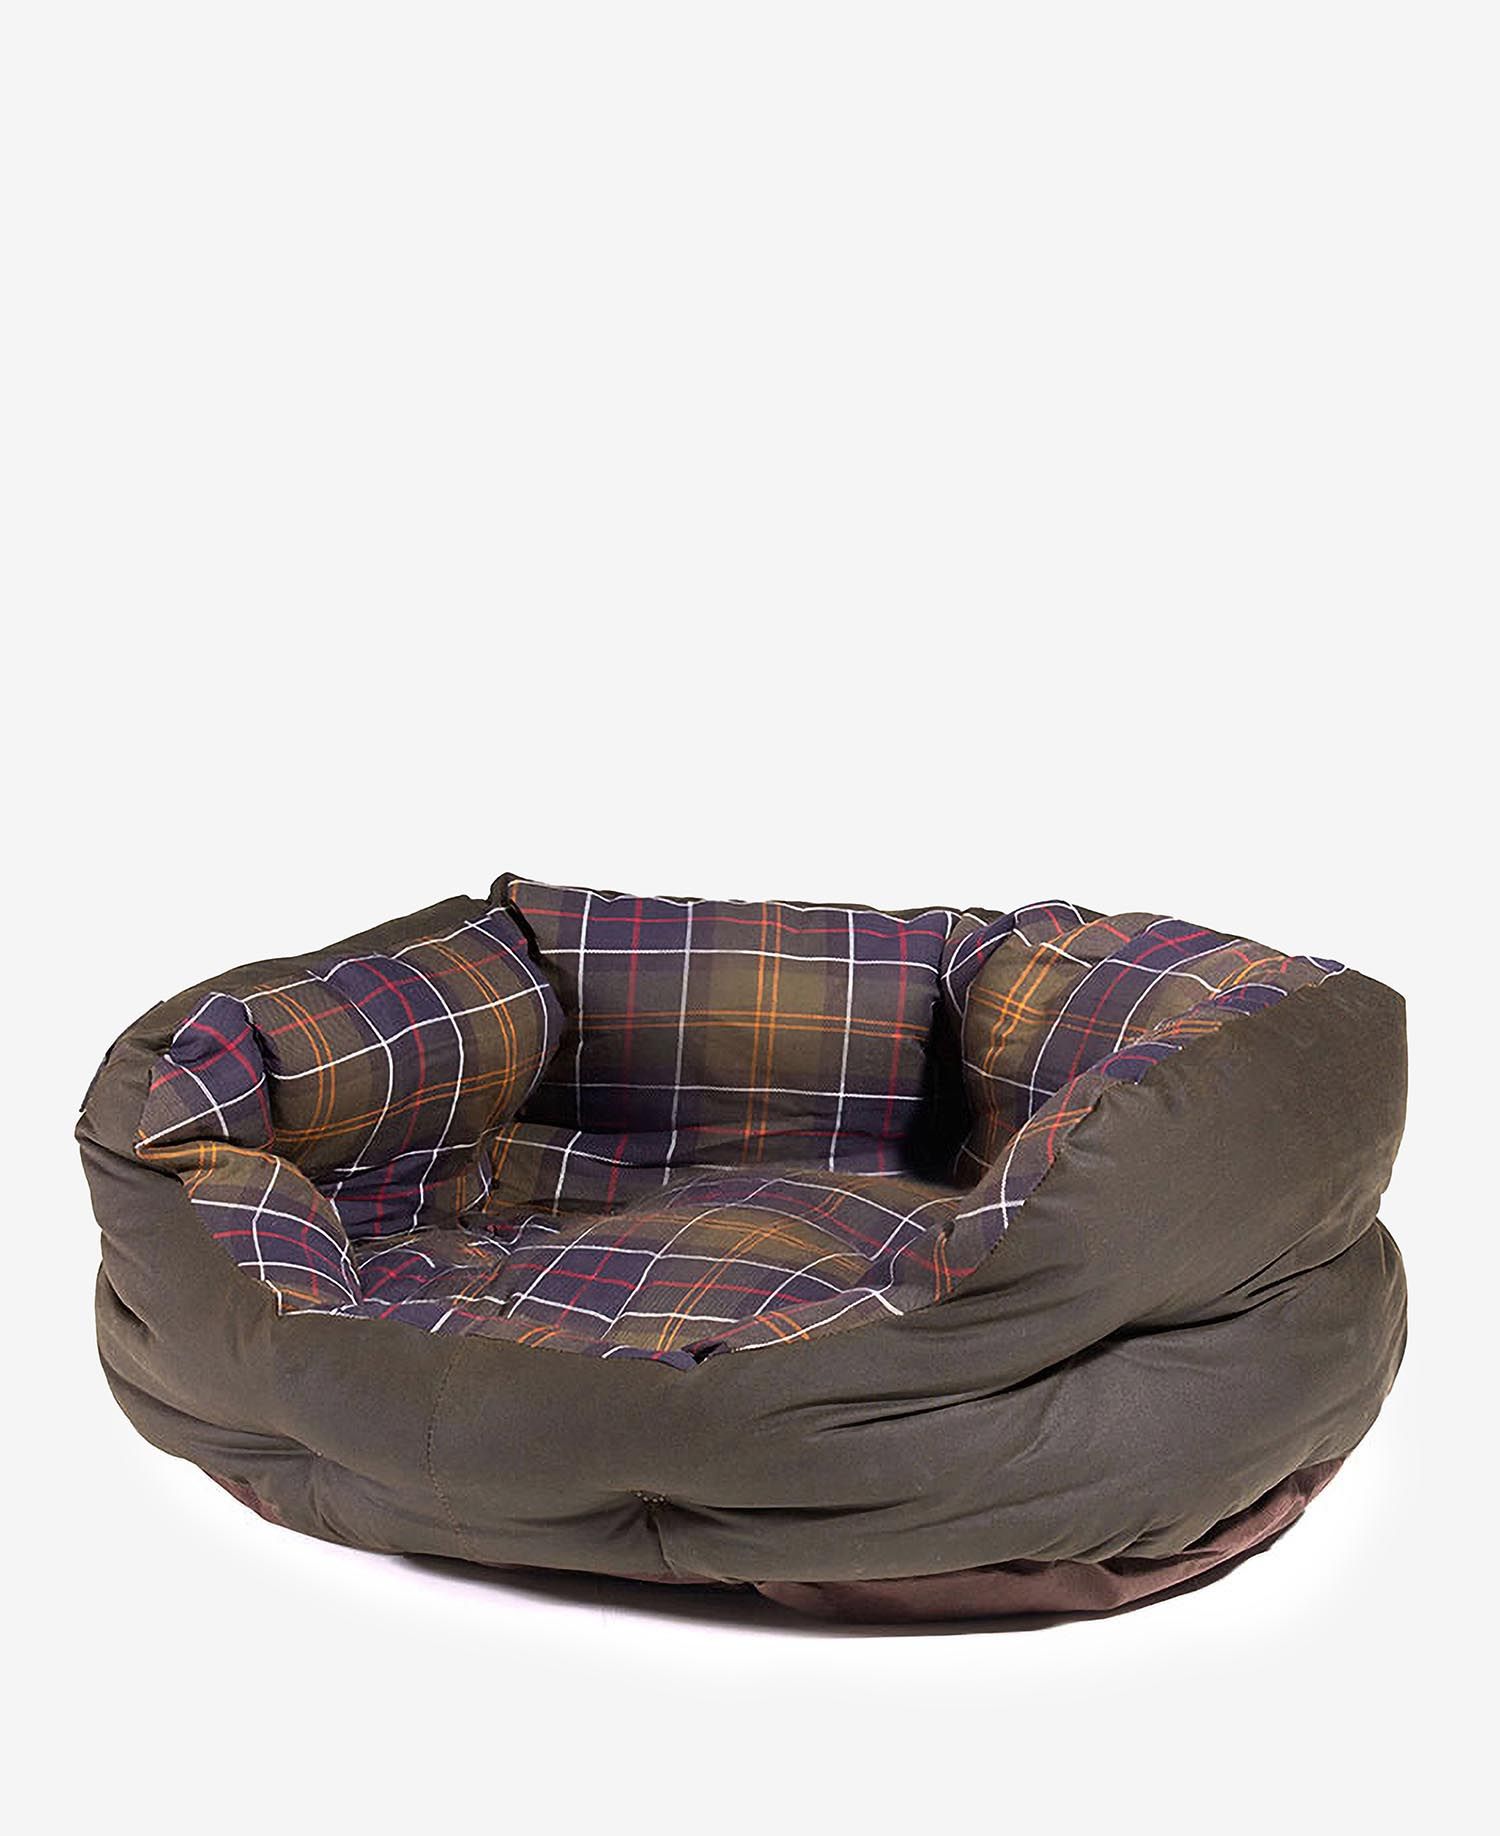 Barbour Wax/Cotton Dog Bed 24in